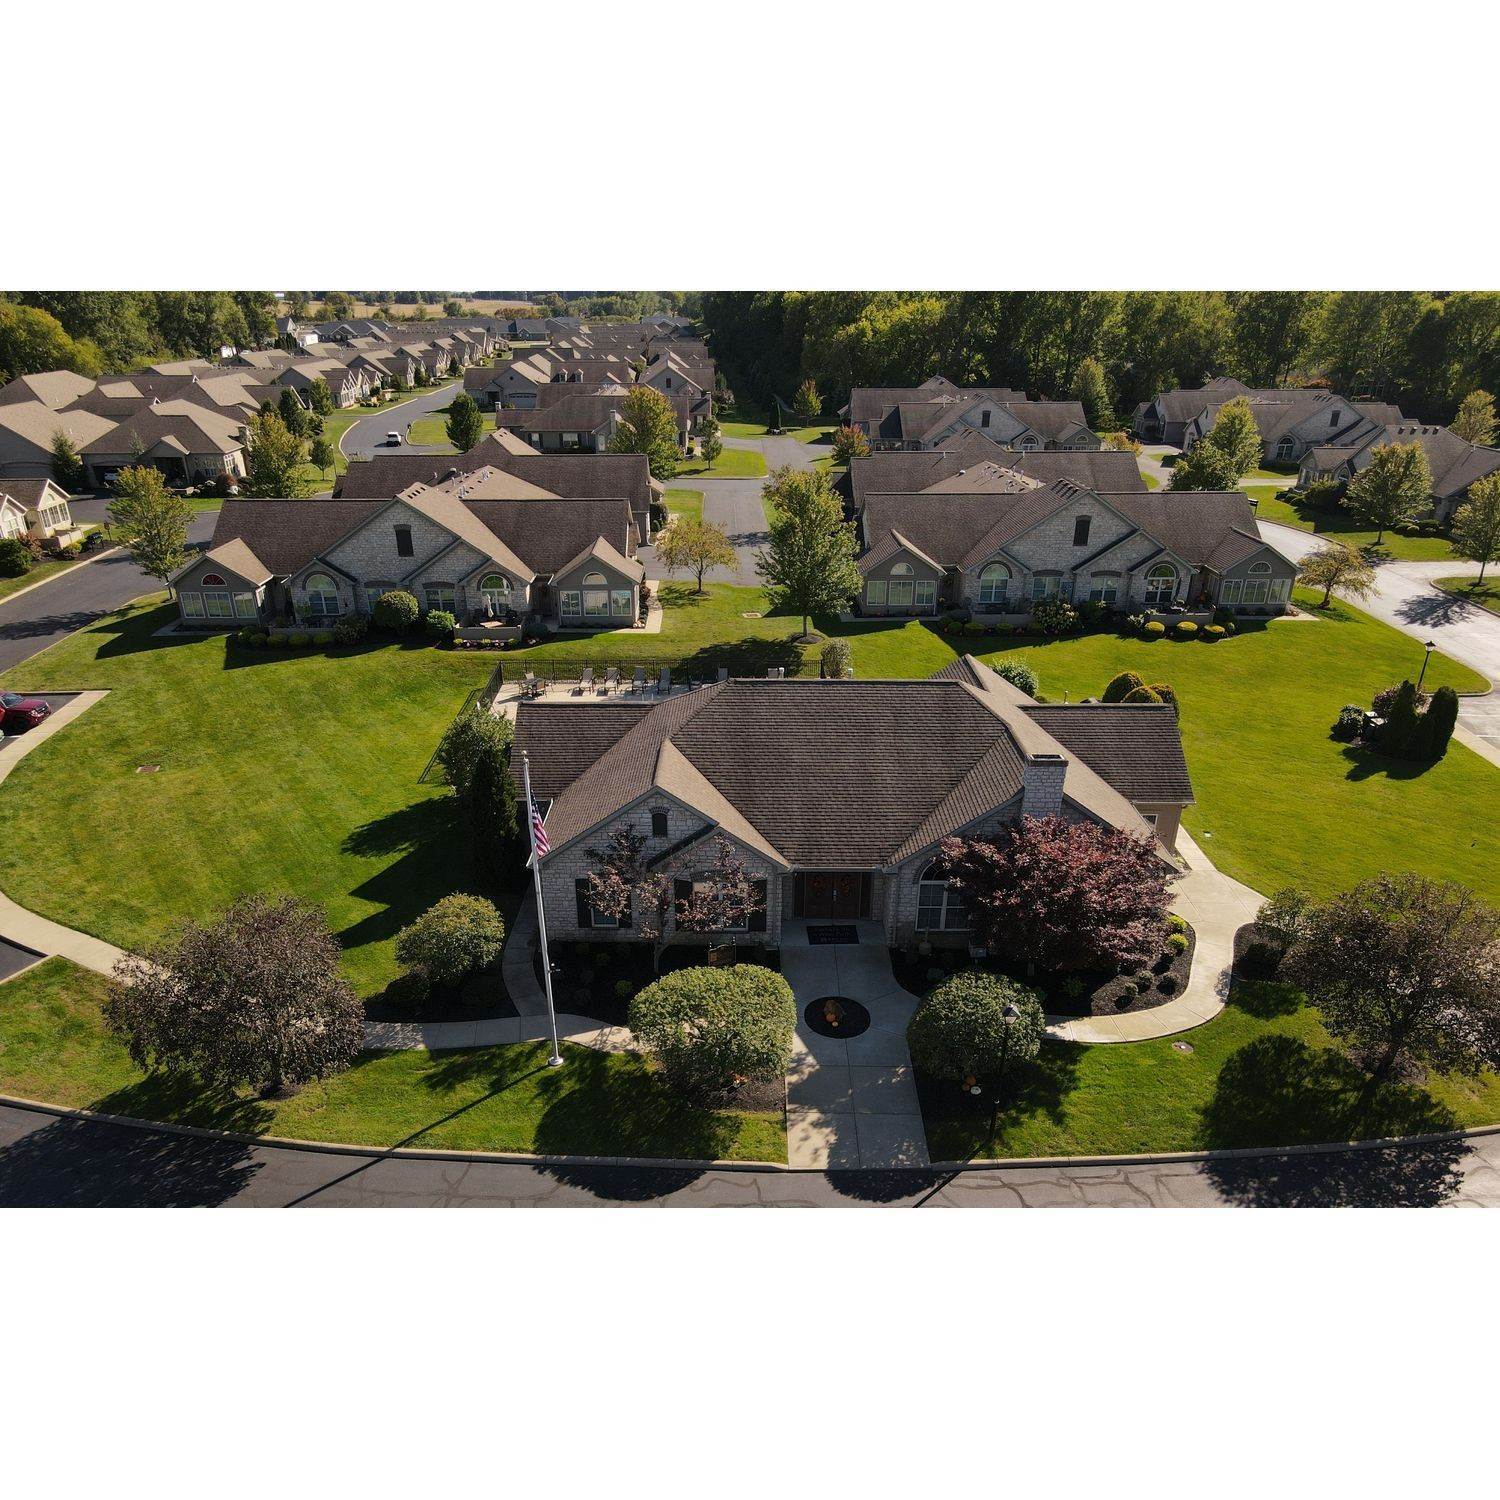 13. The Courtyards at Plum Brook prédio em 4079 Coventry Circle, Huron, OH 44839